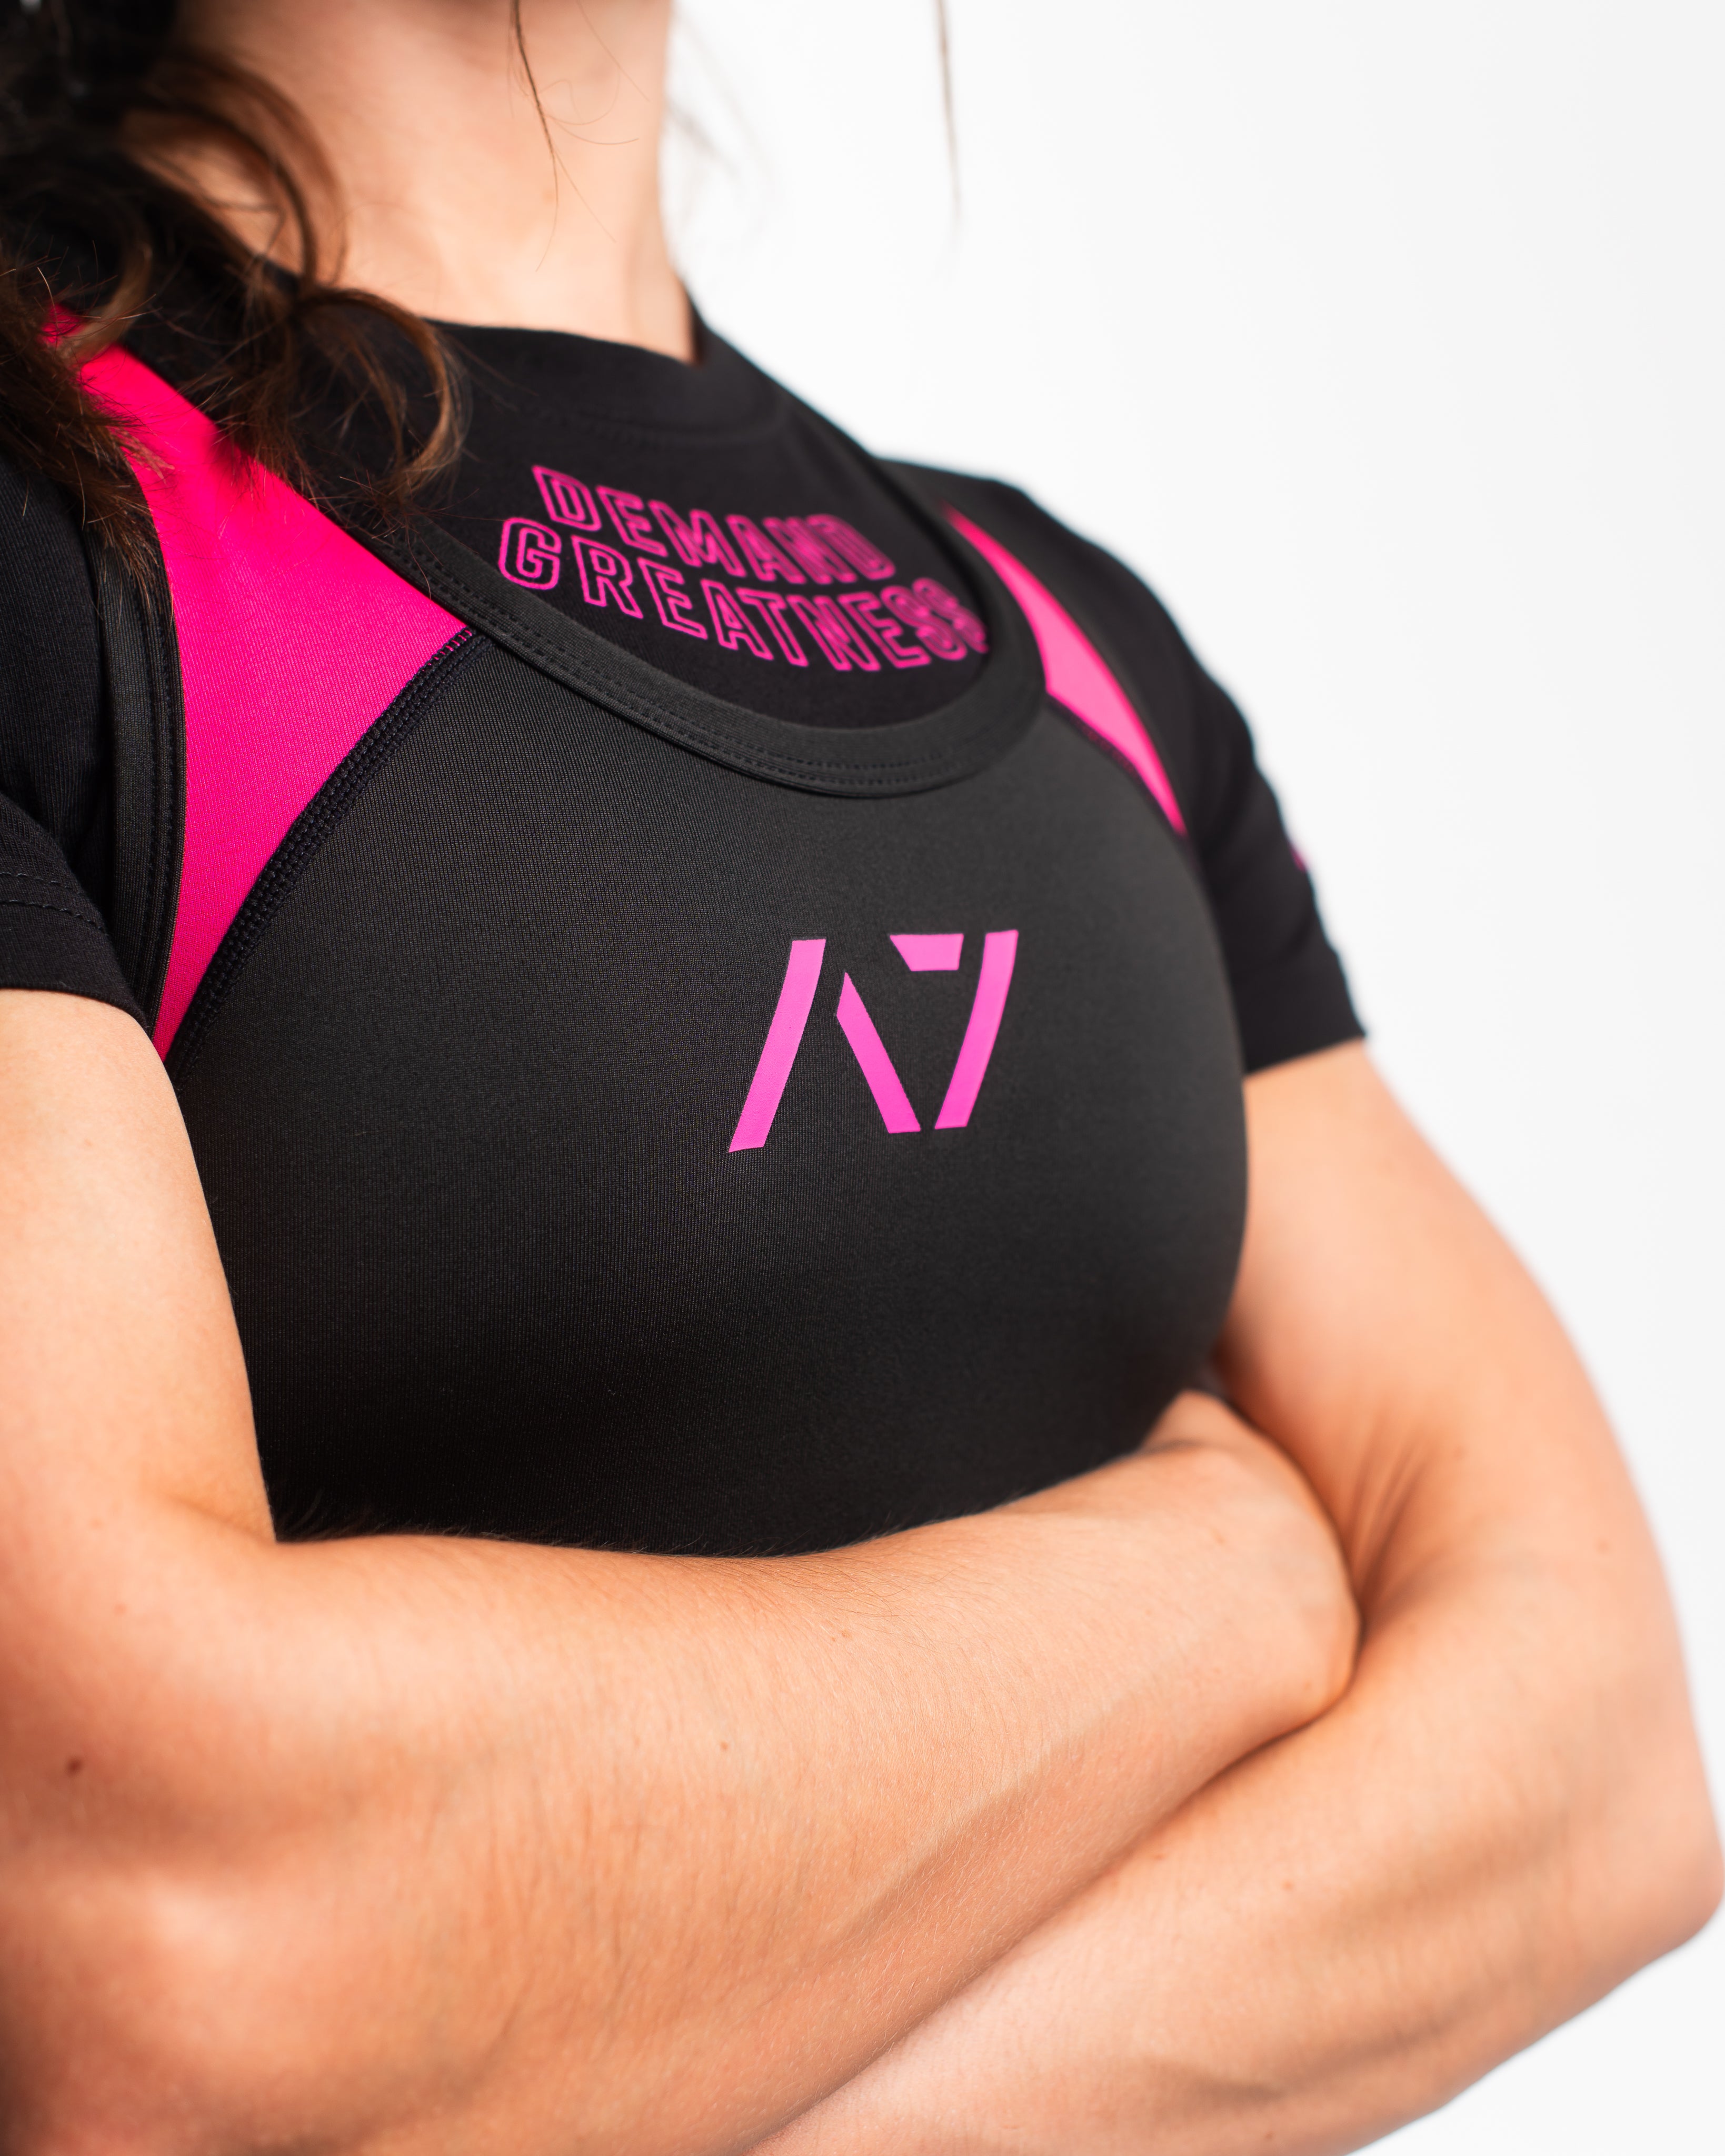 A7 IPF Approved Flamingo Luno singlet with extra lat mobility, side panel stitching to guide the squat depth level and curved panel design for a slimming look. The Women's cut singlet features a tapered waist and additional quad room. The IPF Approved Kit includes Powerlifting Singlet, A7 Meet Shirt, A7 Zebra Wrist Wraps, A7 Deadlift Socks, Hourglass Knee Sleeves (Stiff Knee Sleeves and Rigor Mortis Knee Sleeves). Genouillères powerlifting shipping to France, Spain, Ireland, Germany, Italy, Sweden and EU.